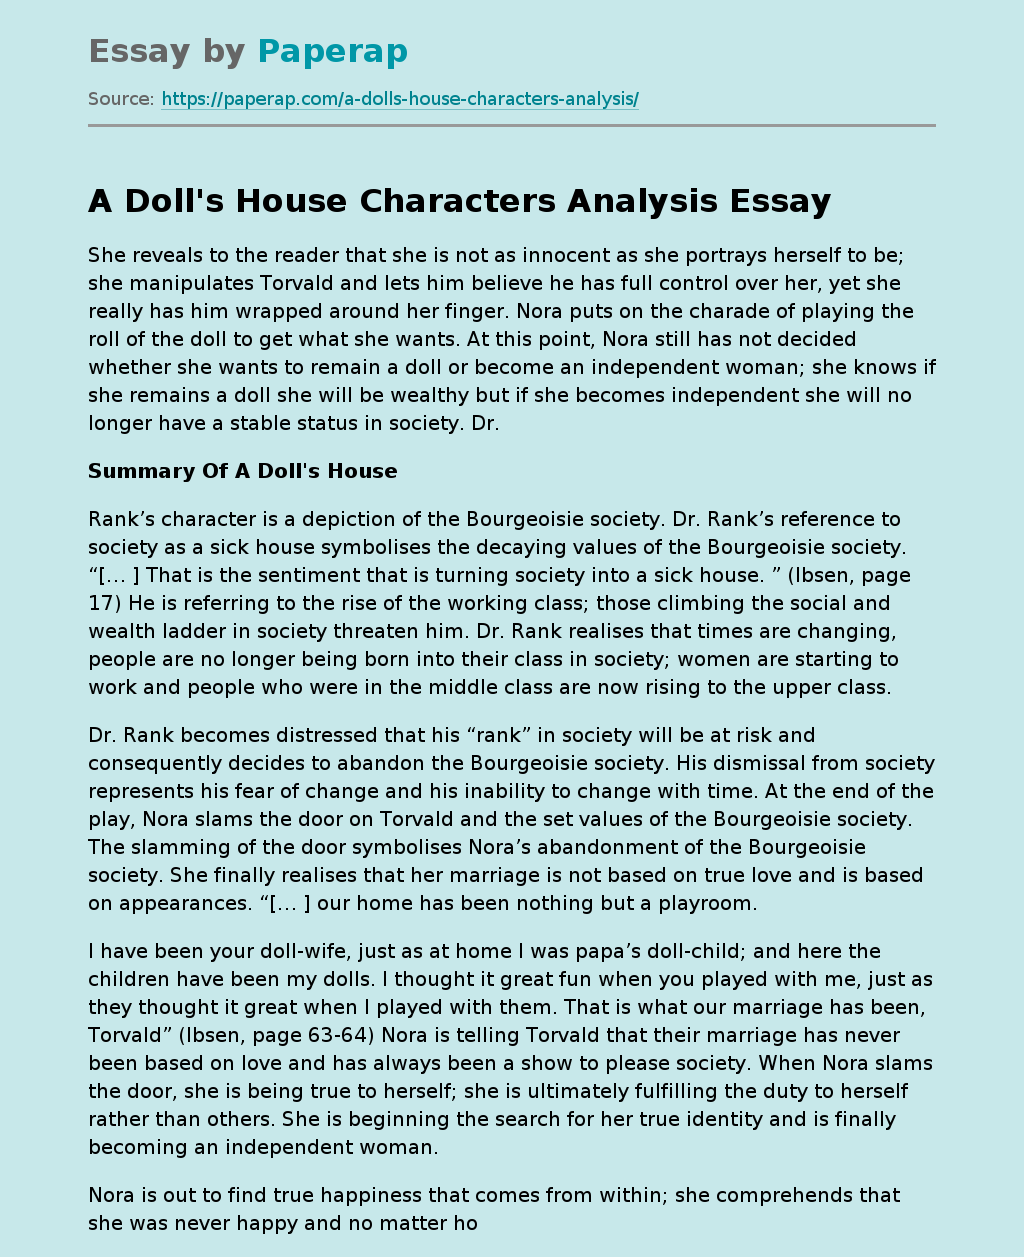 doll's house essay questions and answers